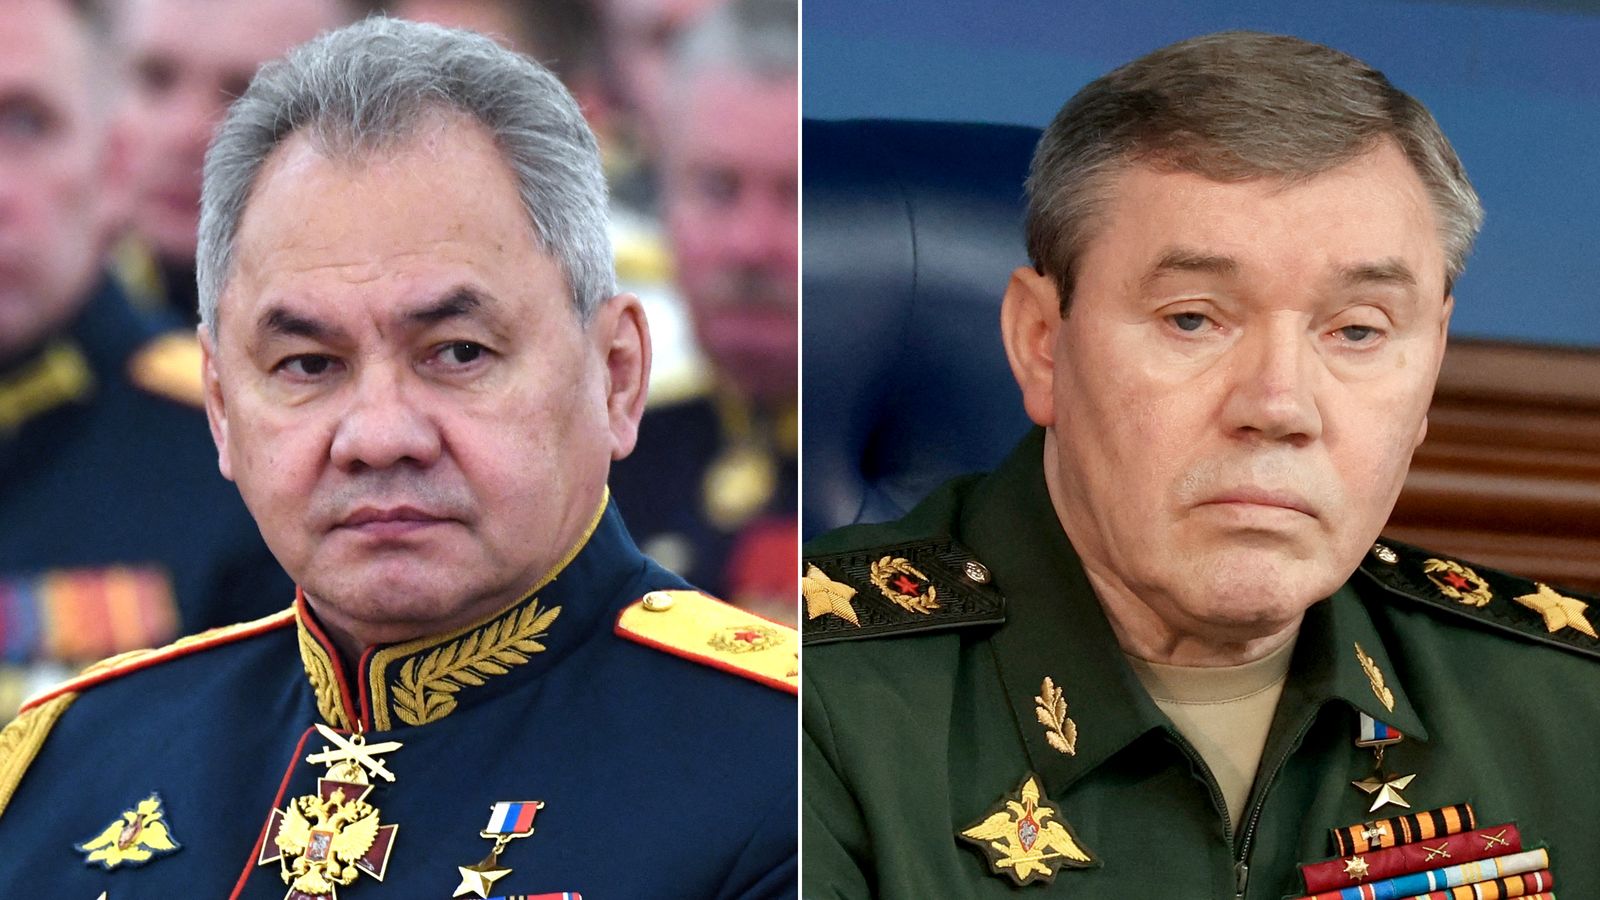 Former Russian Defense Minister Sergei Shoigu and the Chief of the General Staff Valery Gerasimov are the latest Russian officials to face arrest warrants by the International Criminal Court.